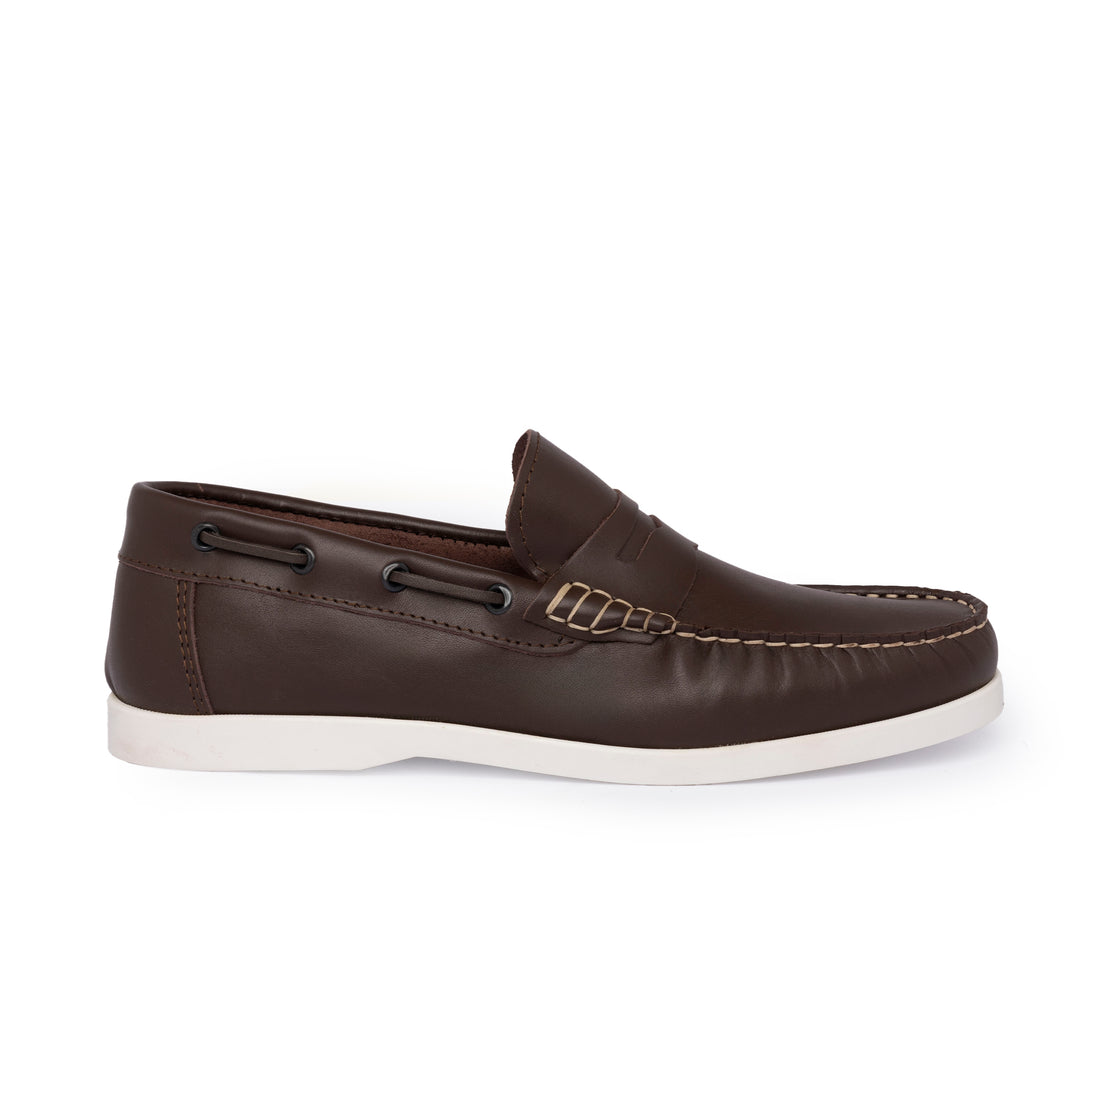 Barca 02 Moccasins with Buckle in Dark Brown Leather